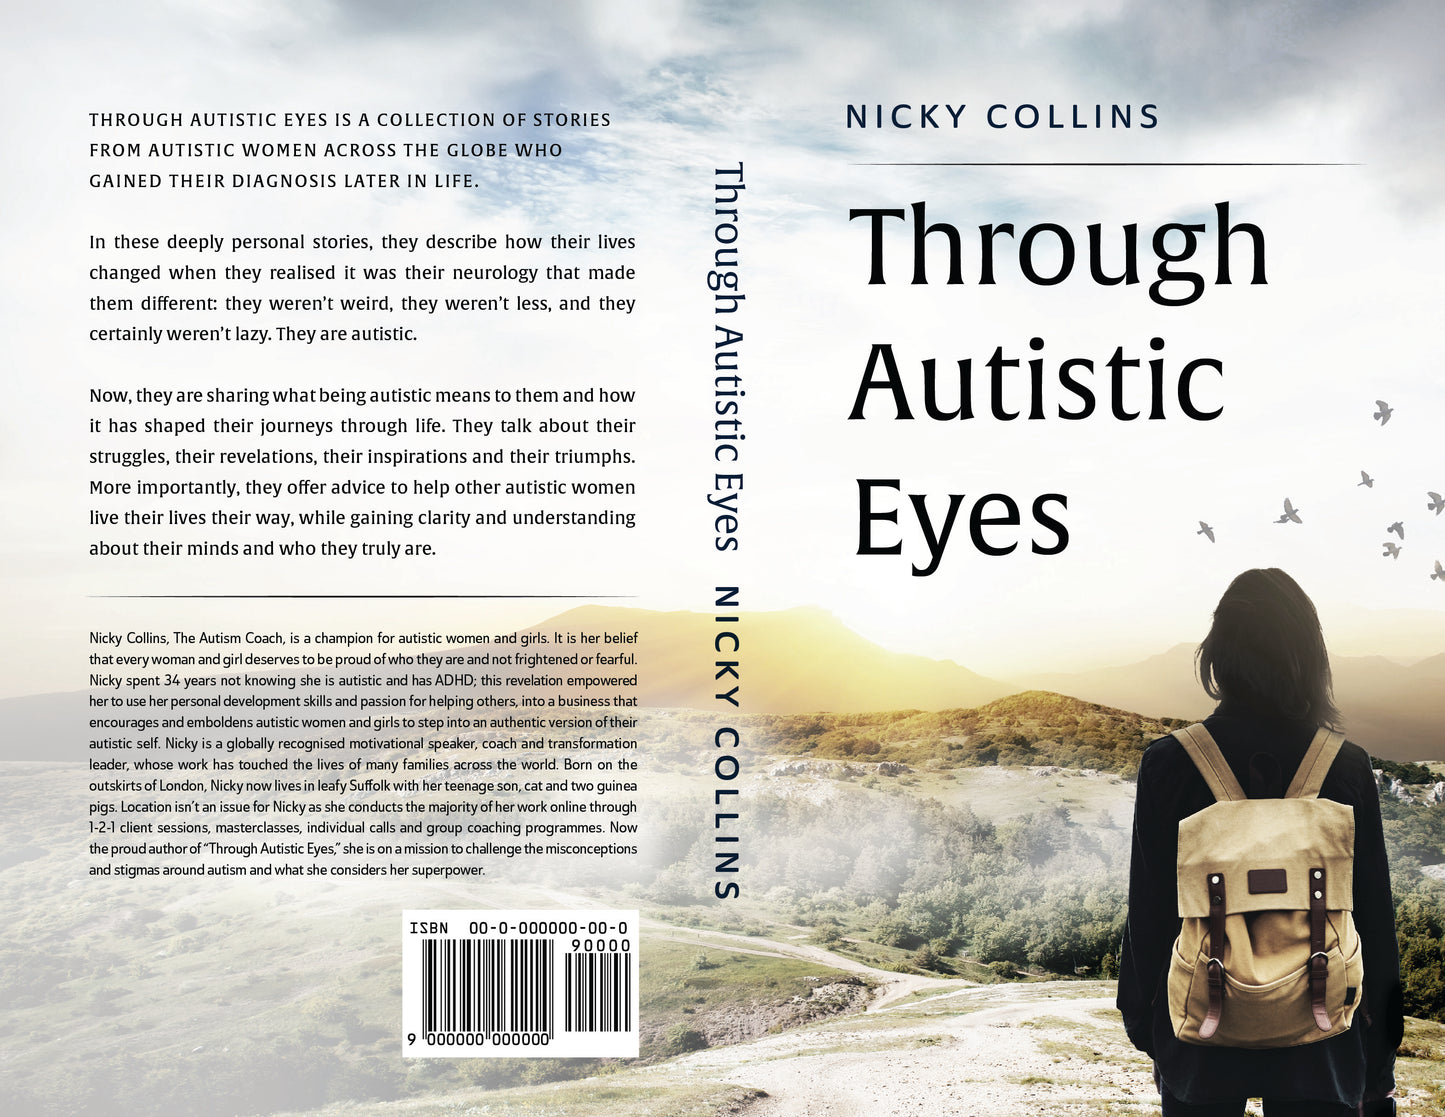 Through Autistic Eyes - Nicky Collins